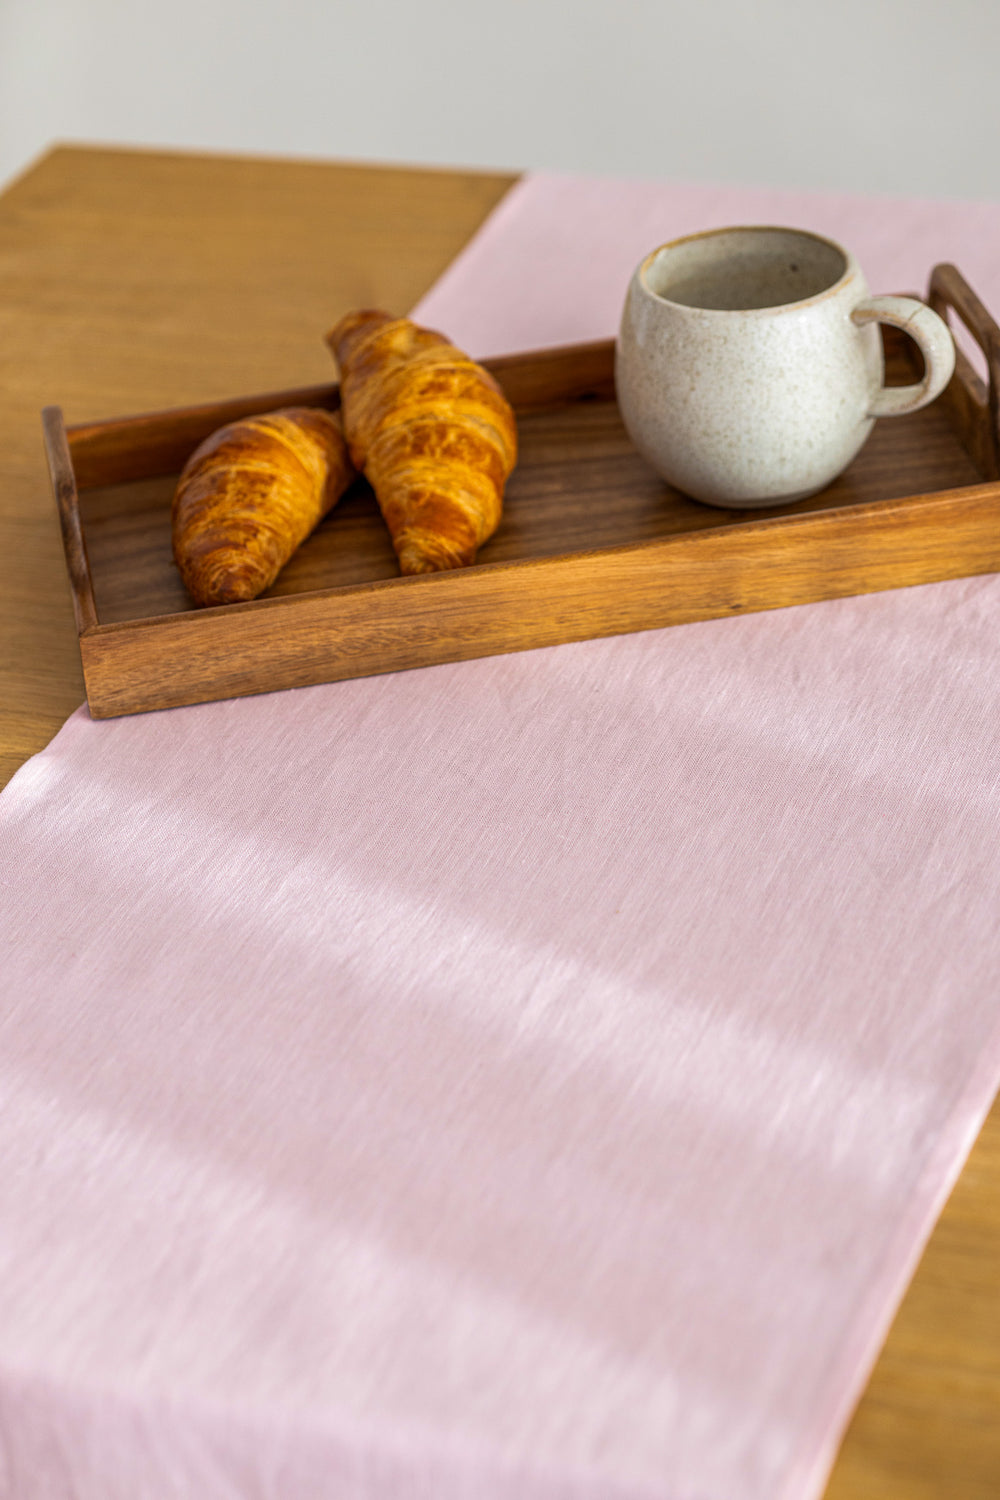 Linen Table Runner On Table In Dusty Rose Color 1 - Daily Linen